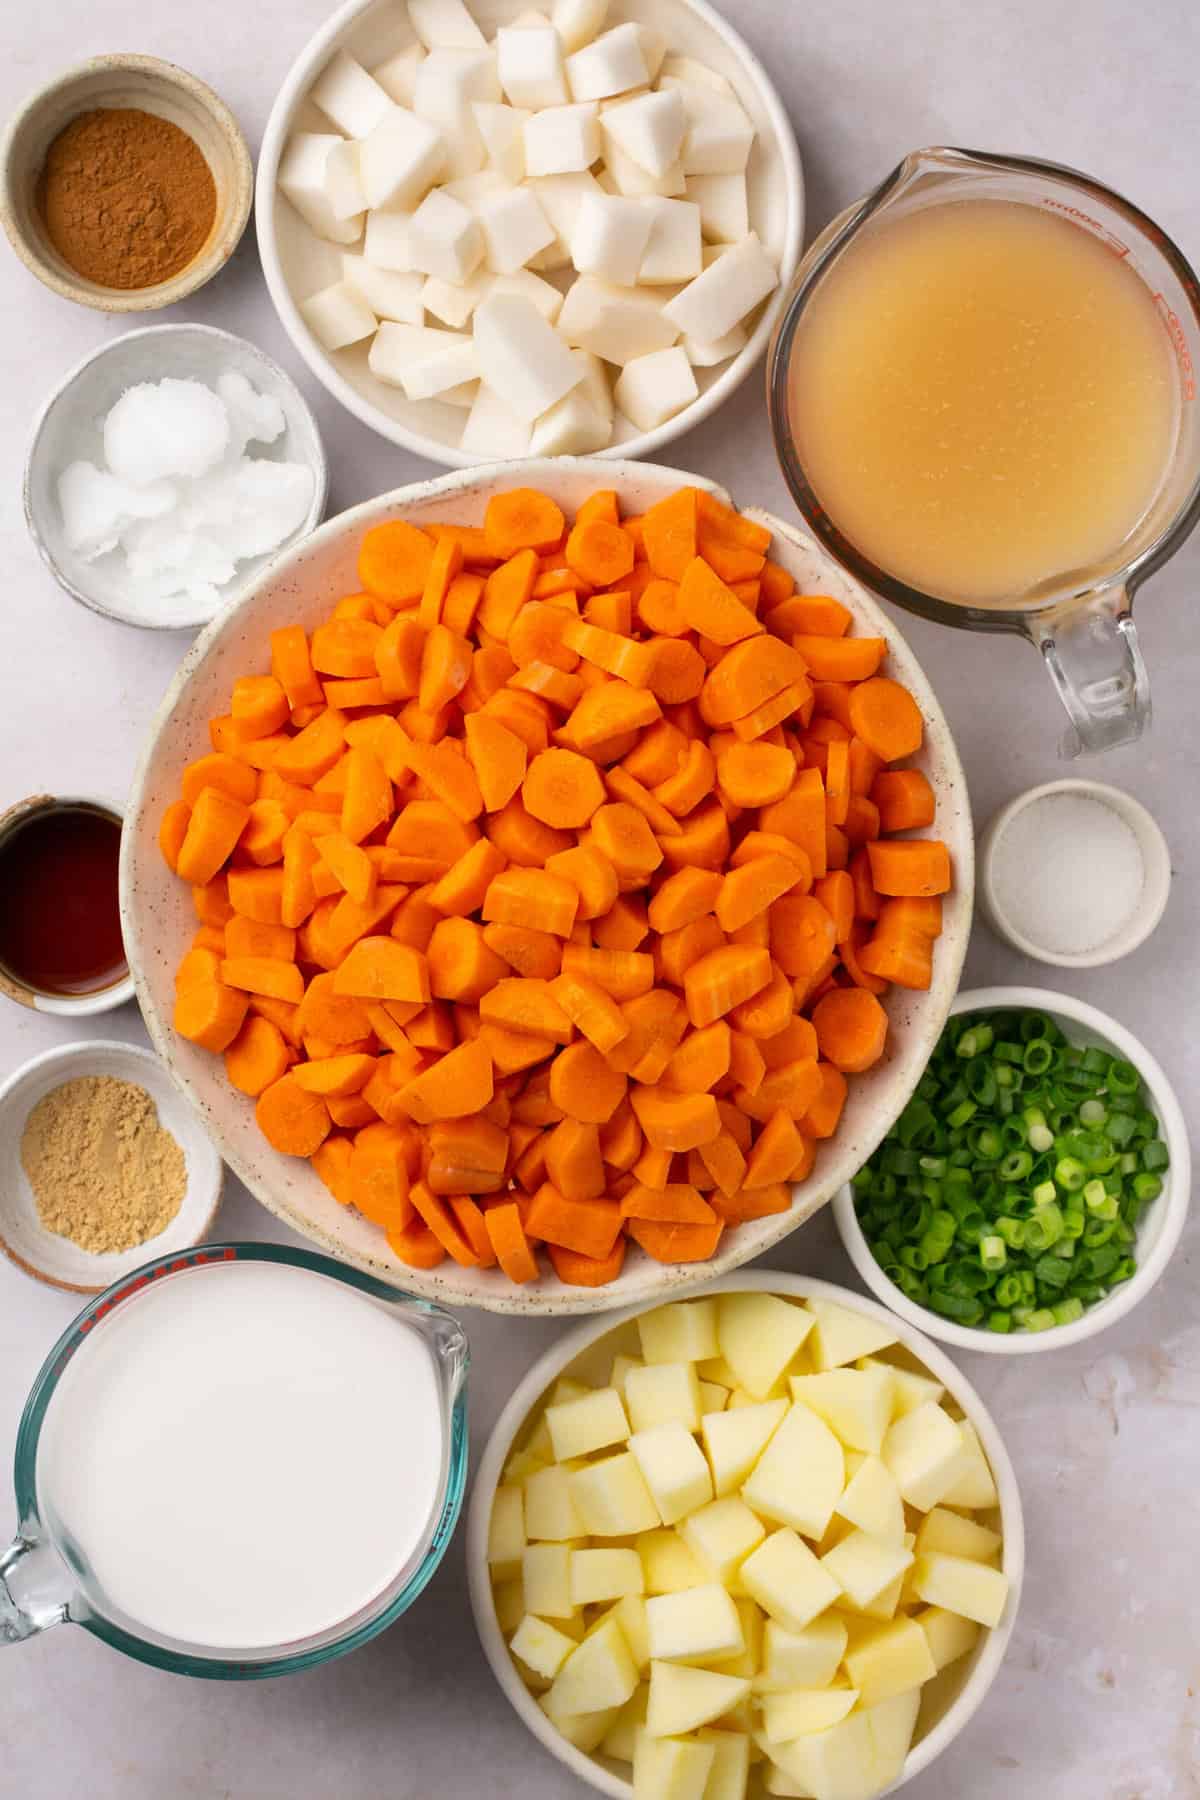 The ingredients needed to make a carrot and turnip soup, separated into bowls.